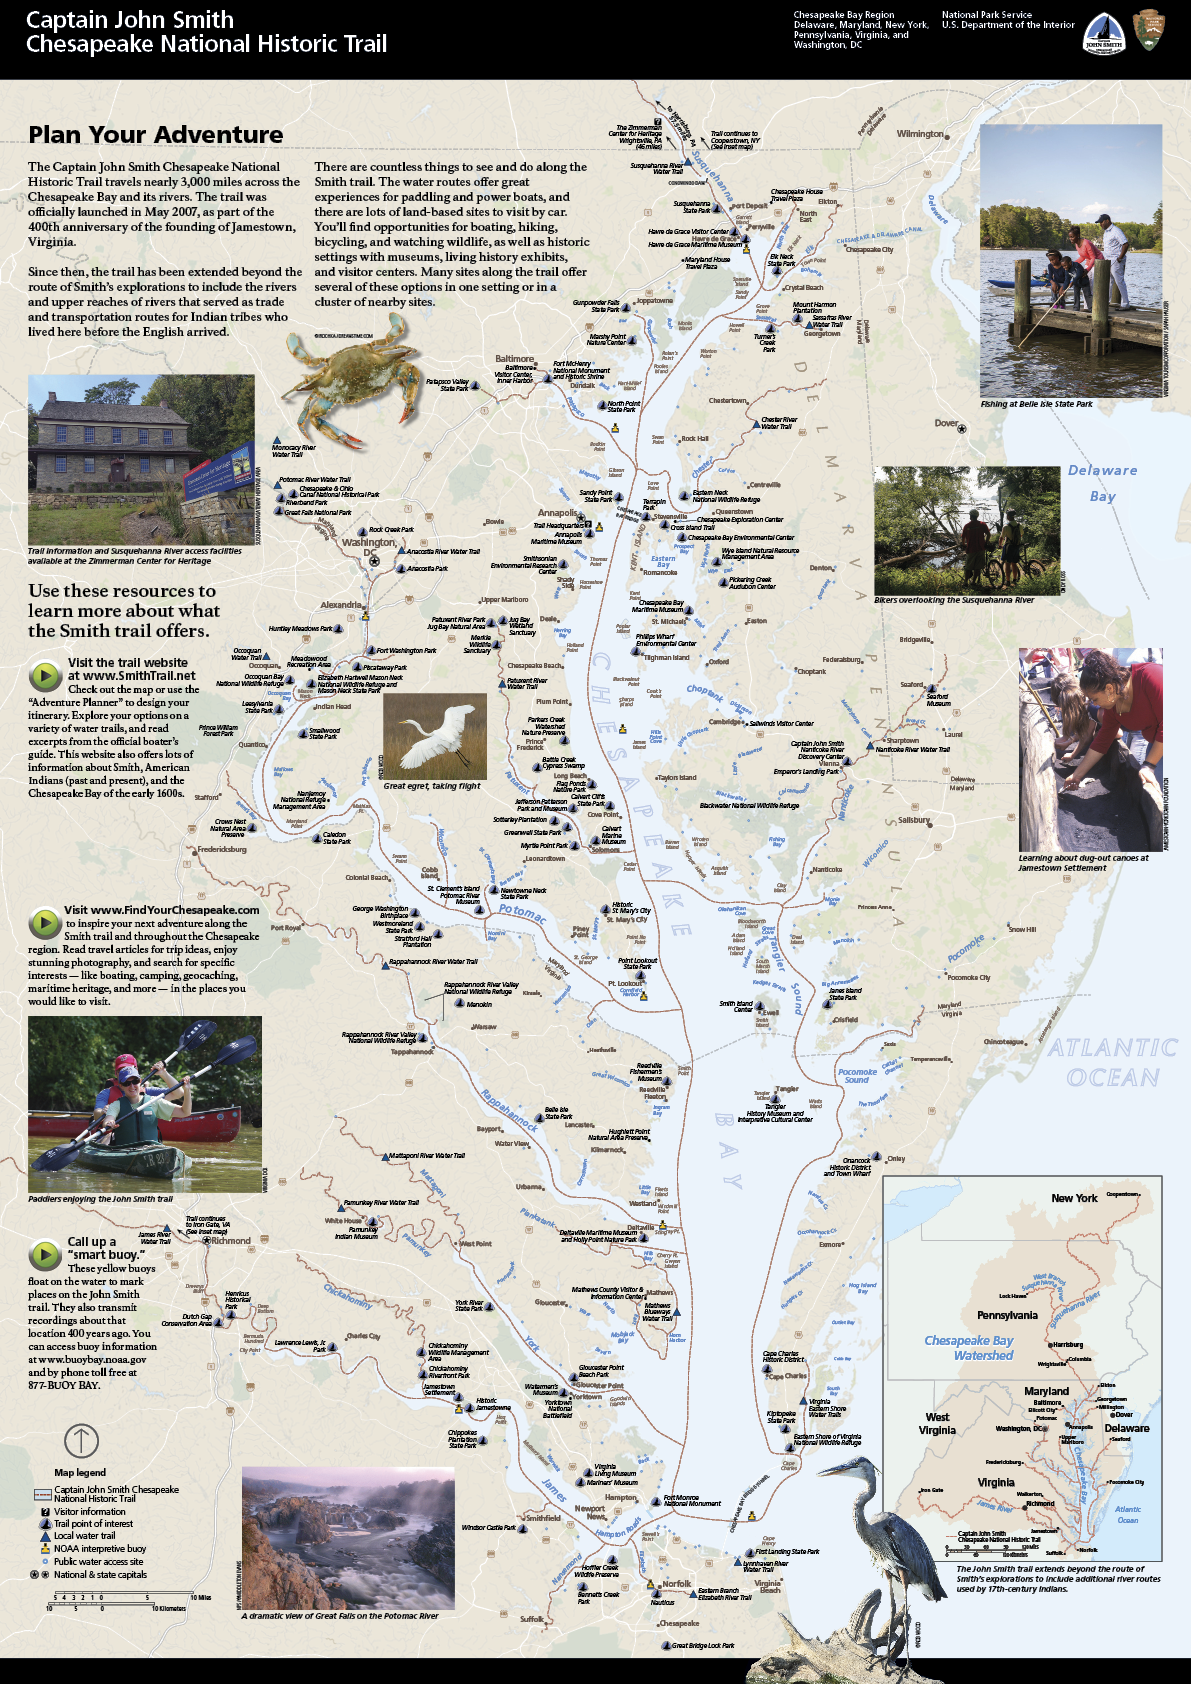 A map of the tidal Chesapeake Bay featuring the path of the Captain John Smith Chesapeake Trail and images around the region. There is also an inset map of the entire Chesapeake Bay watershed, showing the trail entire route up to Copperstown, NY.